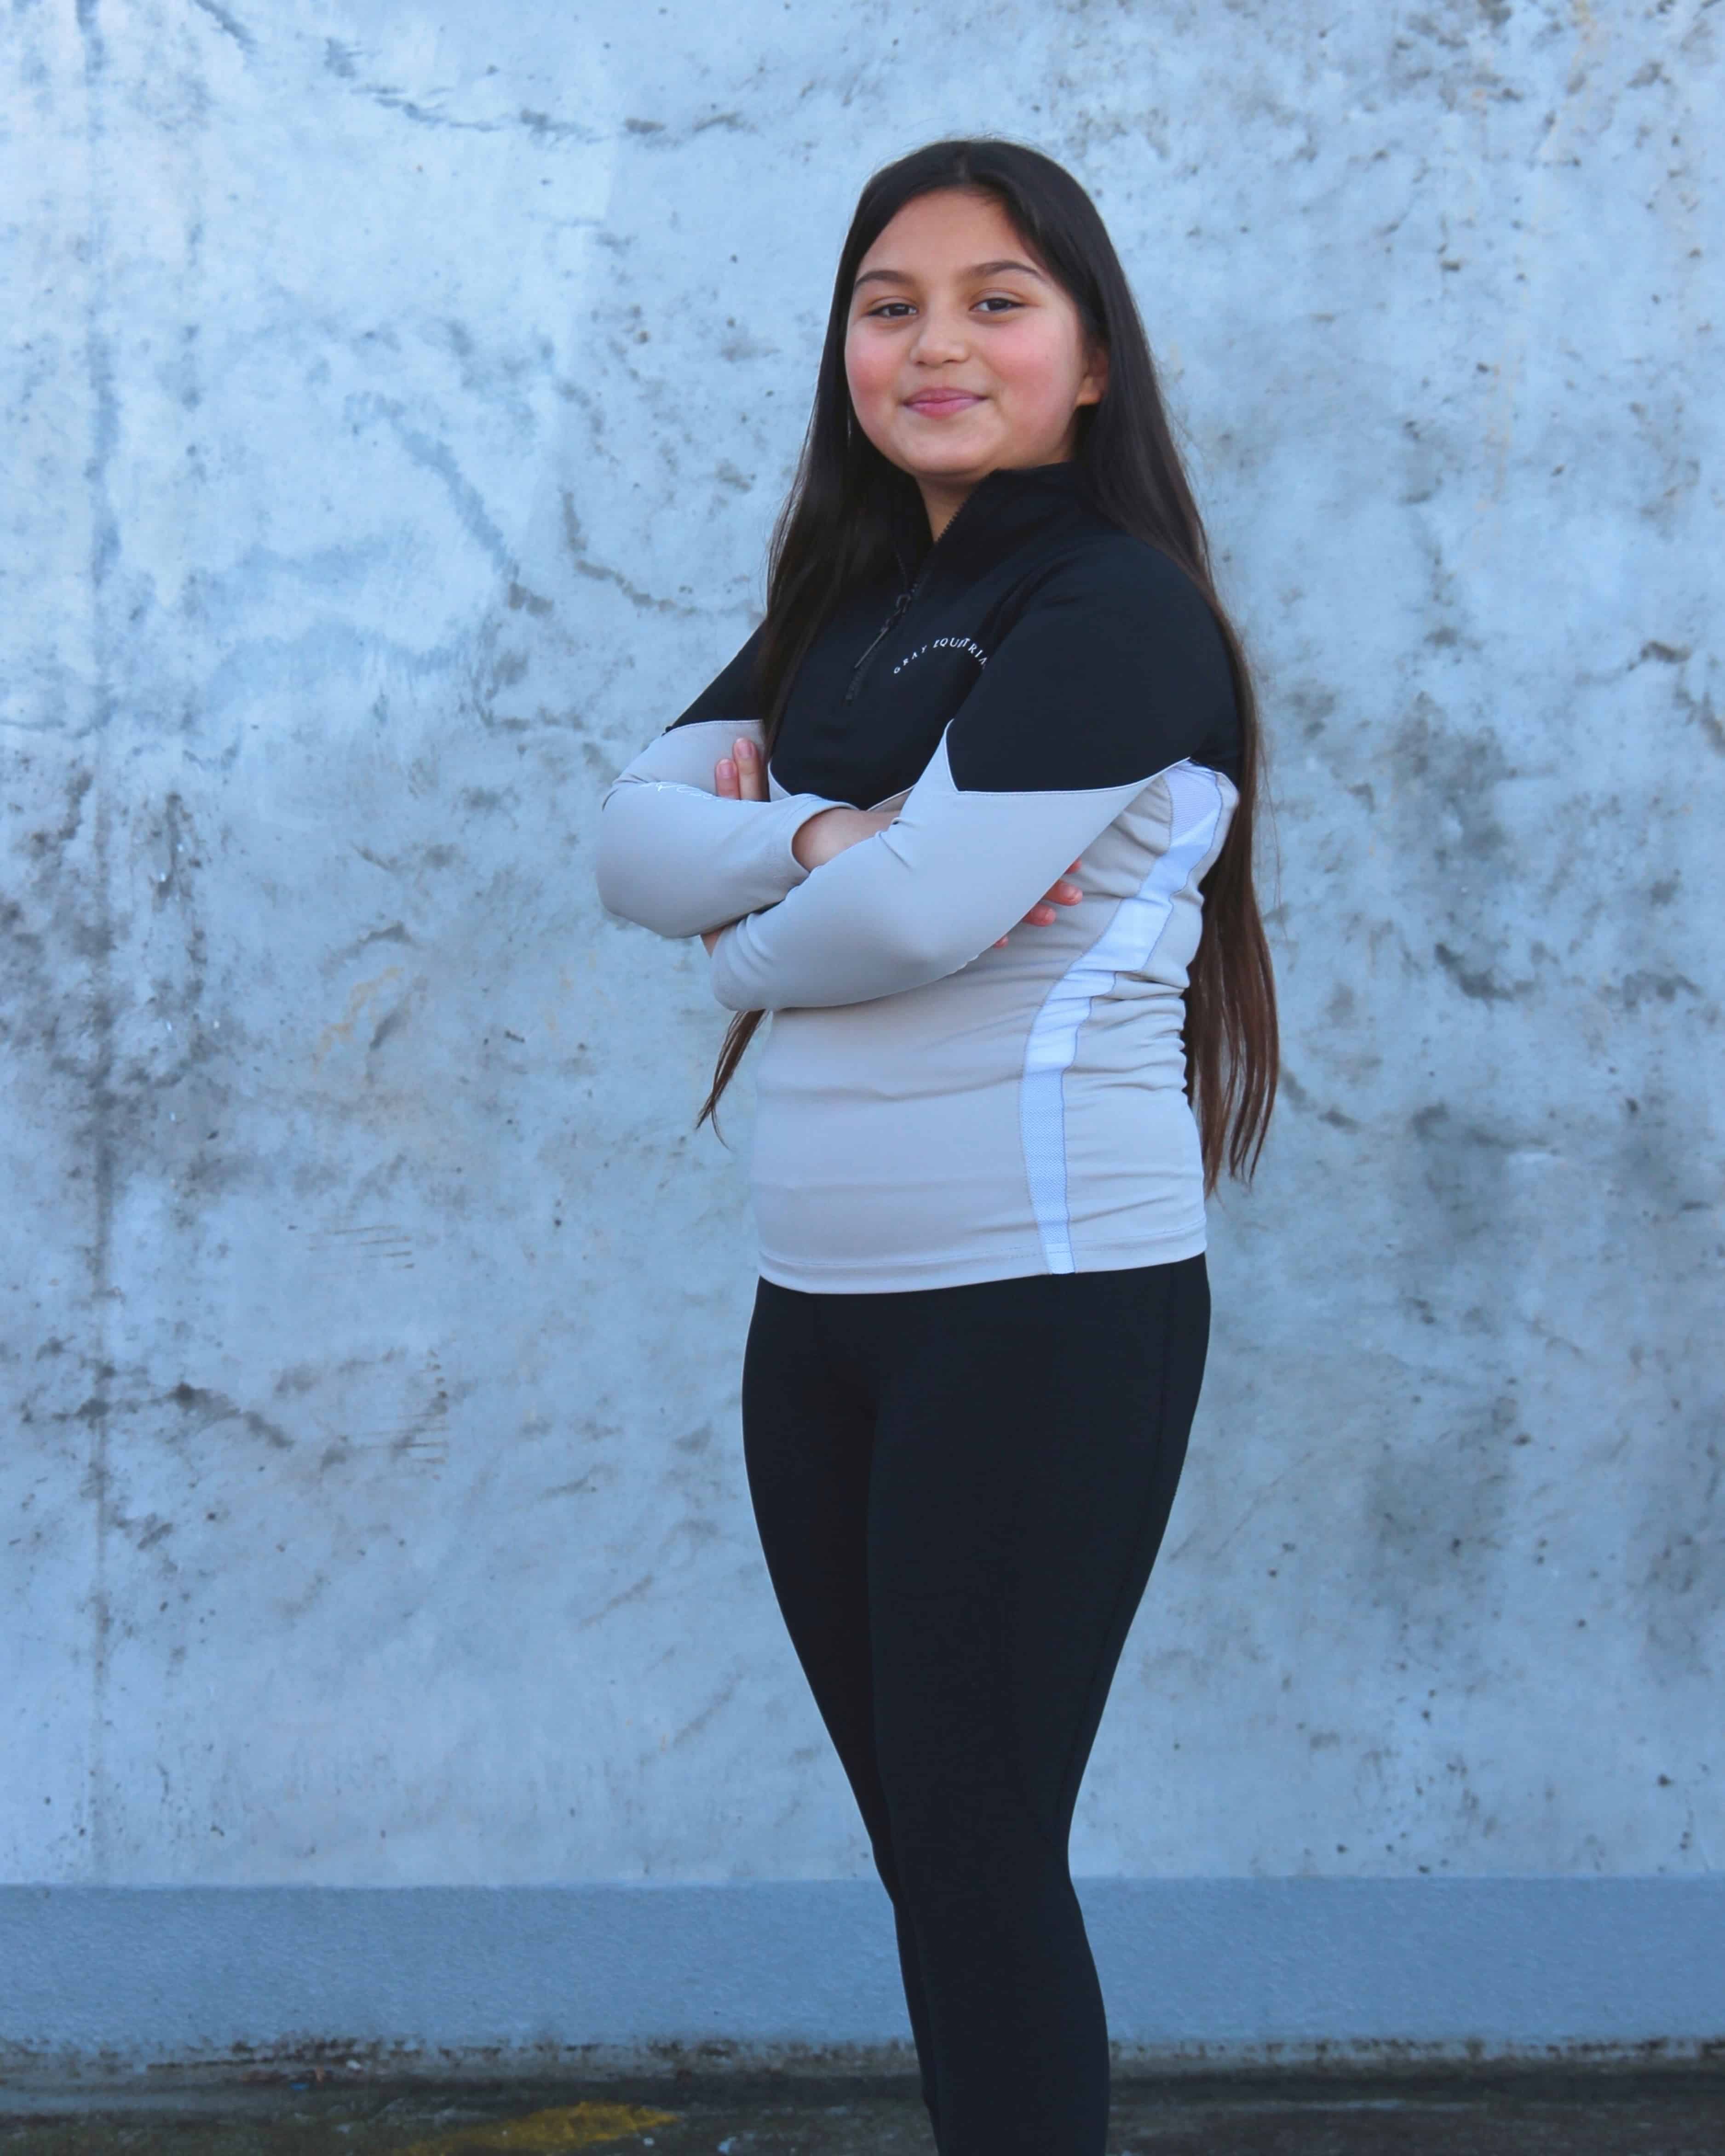 Our child model wearing our black and grey two toned base layer and black riding leggings.